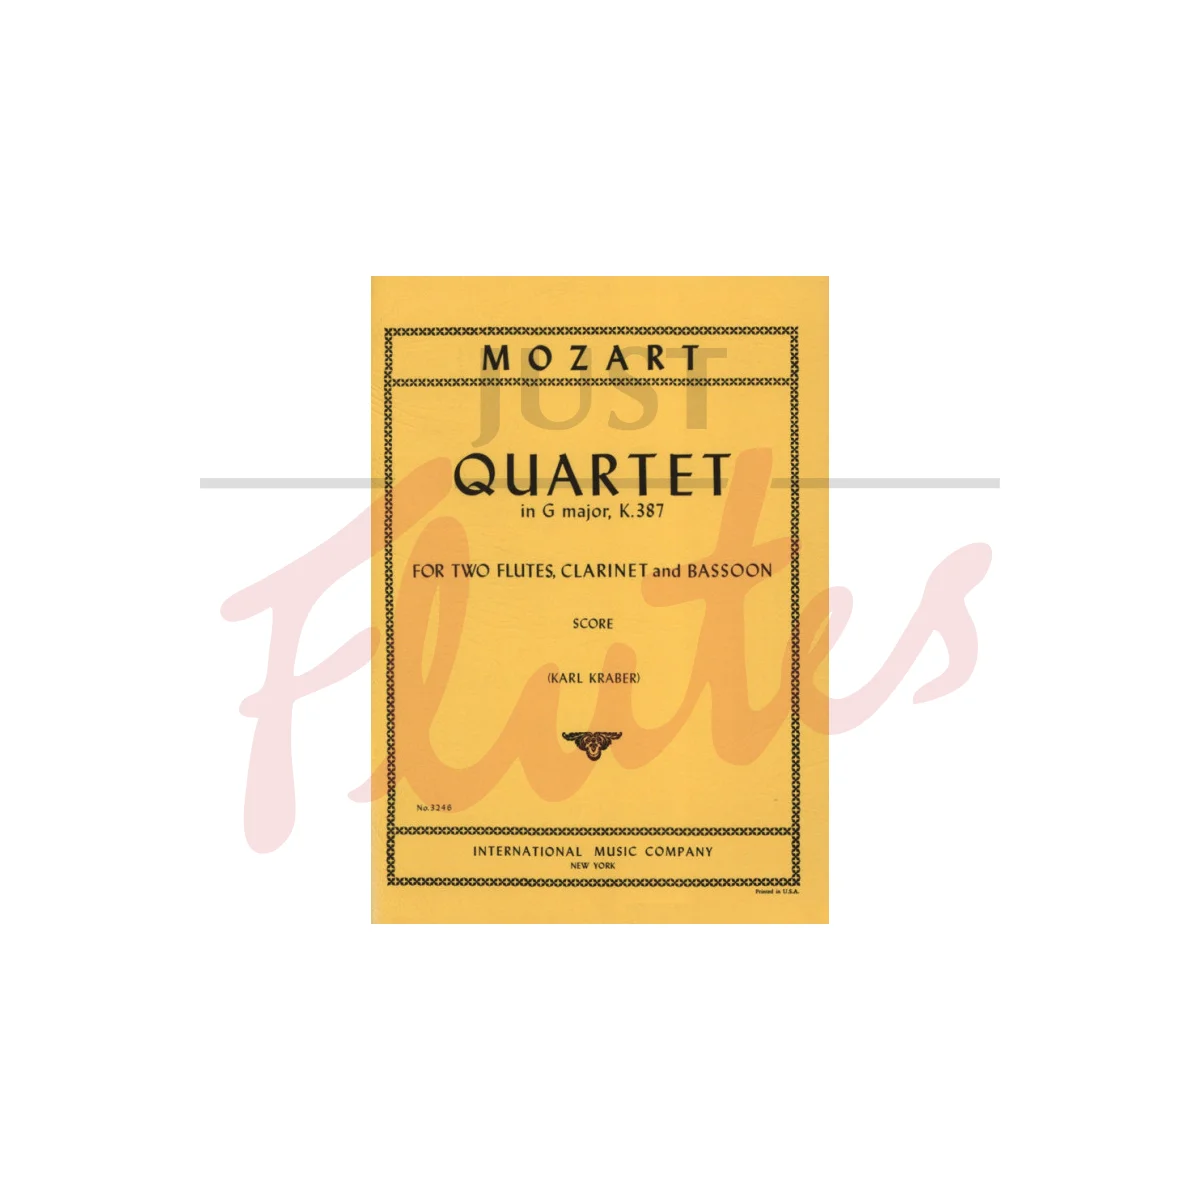 Quartet in G major for Two Flutes, Clarinet and Bassoon